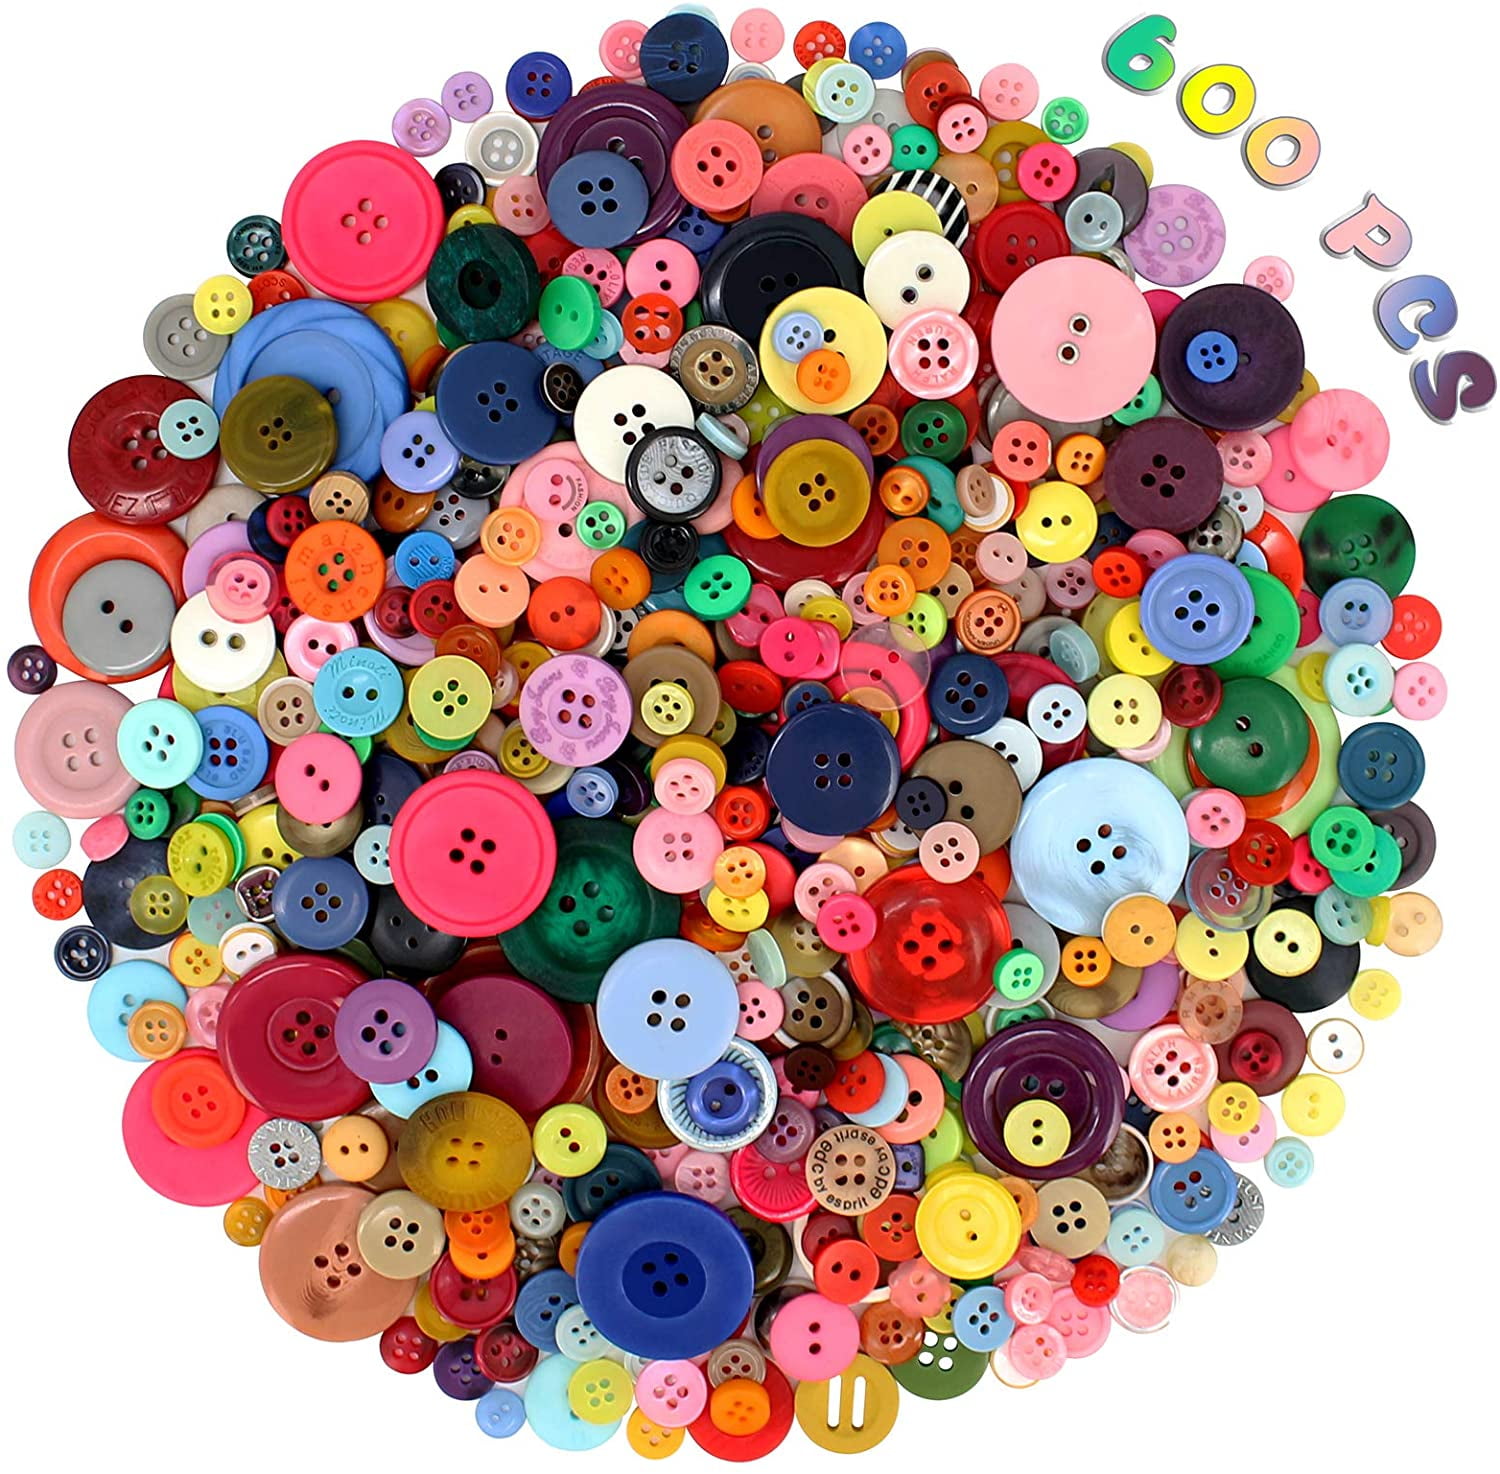 600 Pcs/lot 6mm Round Resin Mini Tiny Buttons Sewing Tools Decorative  Button Scrapbooking Garment D